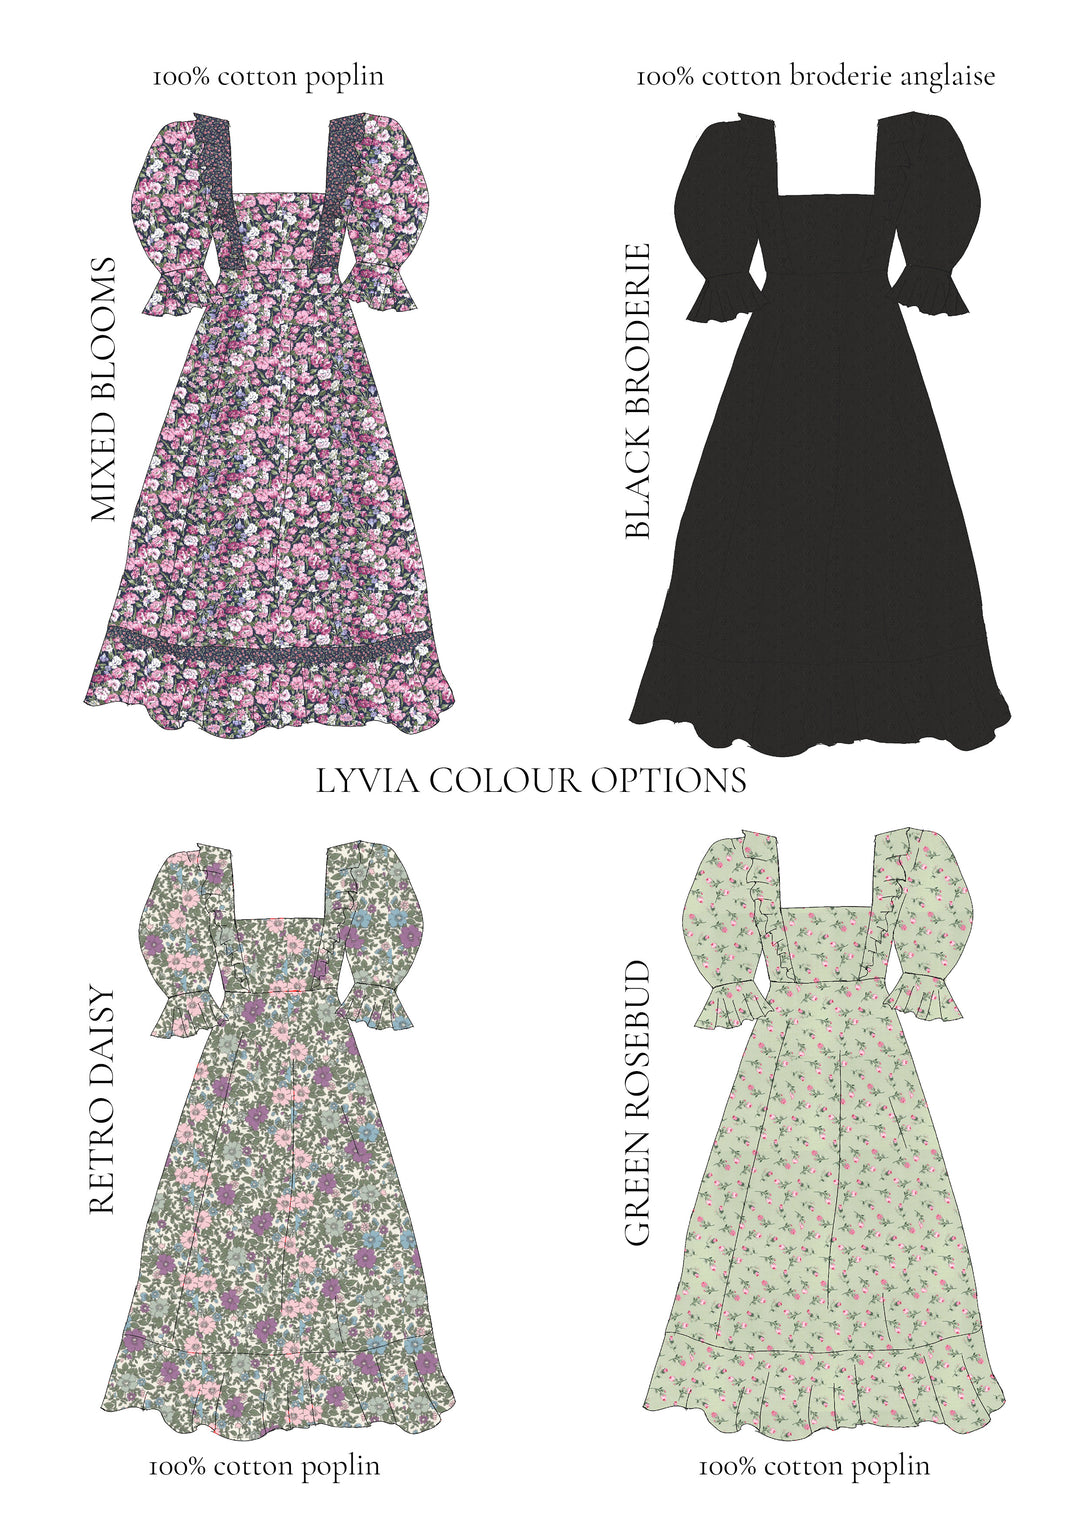 The Lyvia Dress